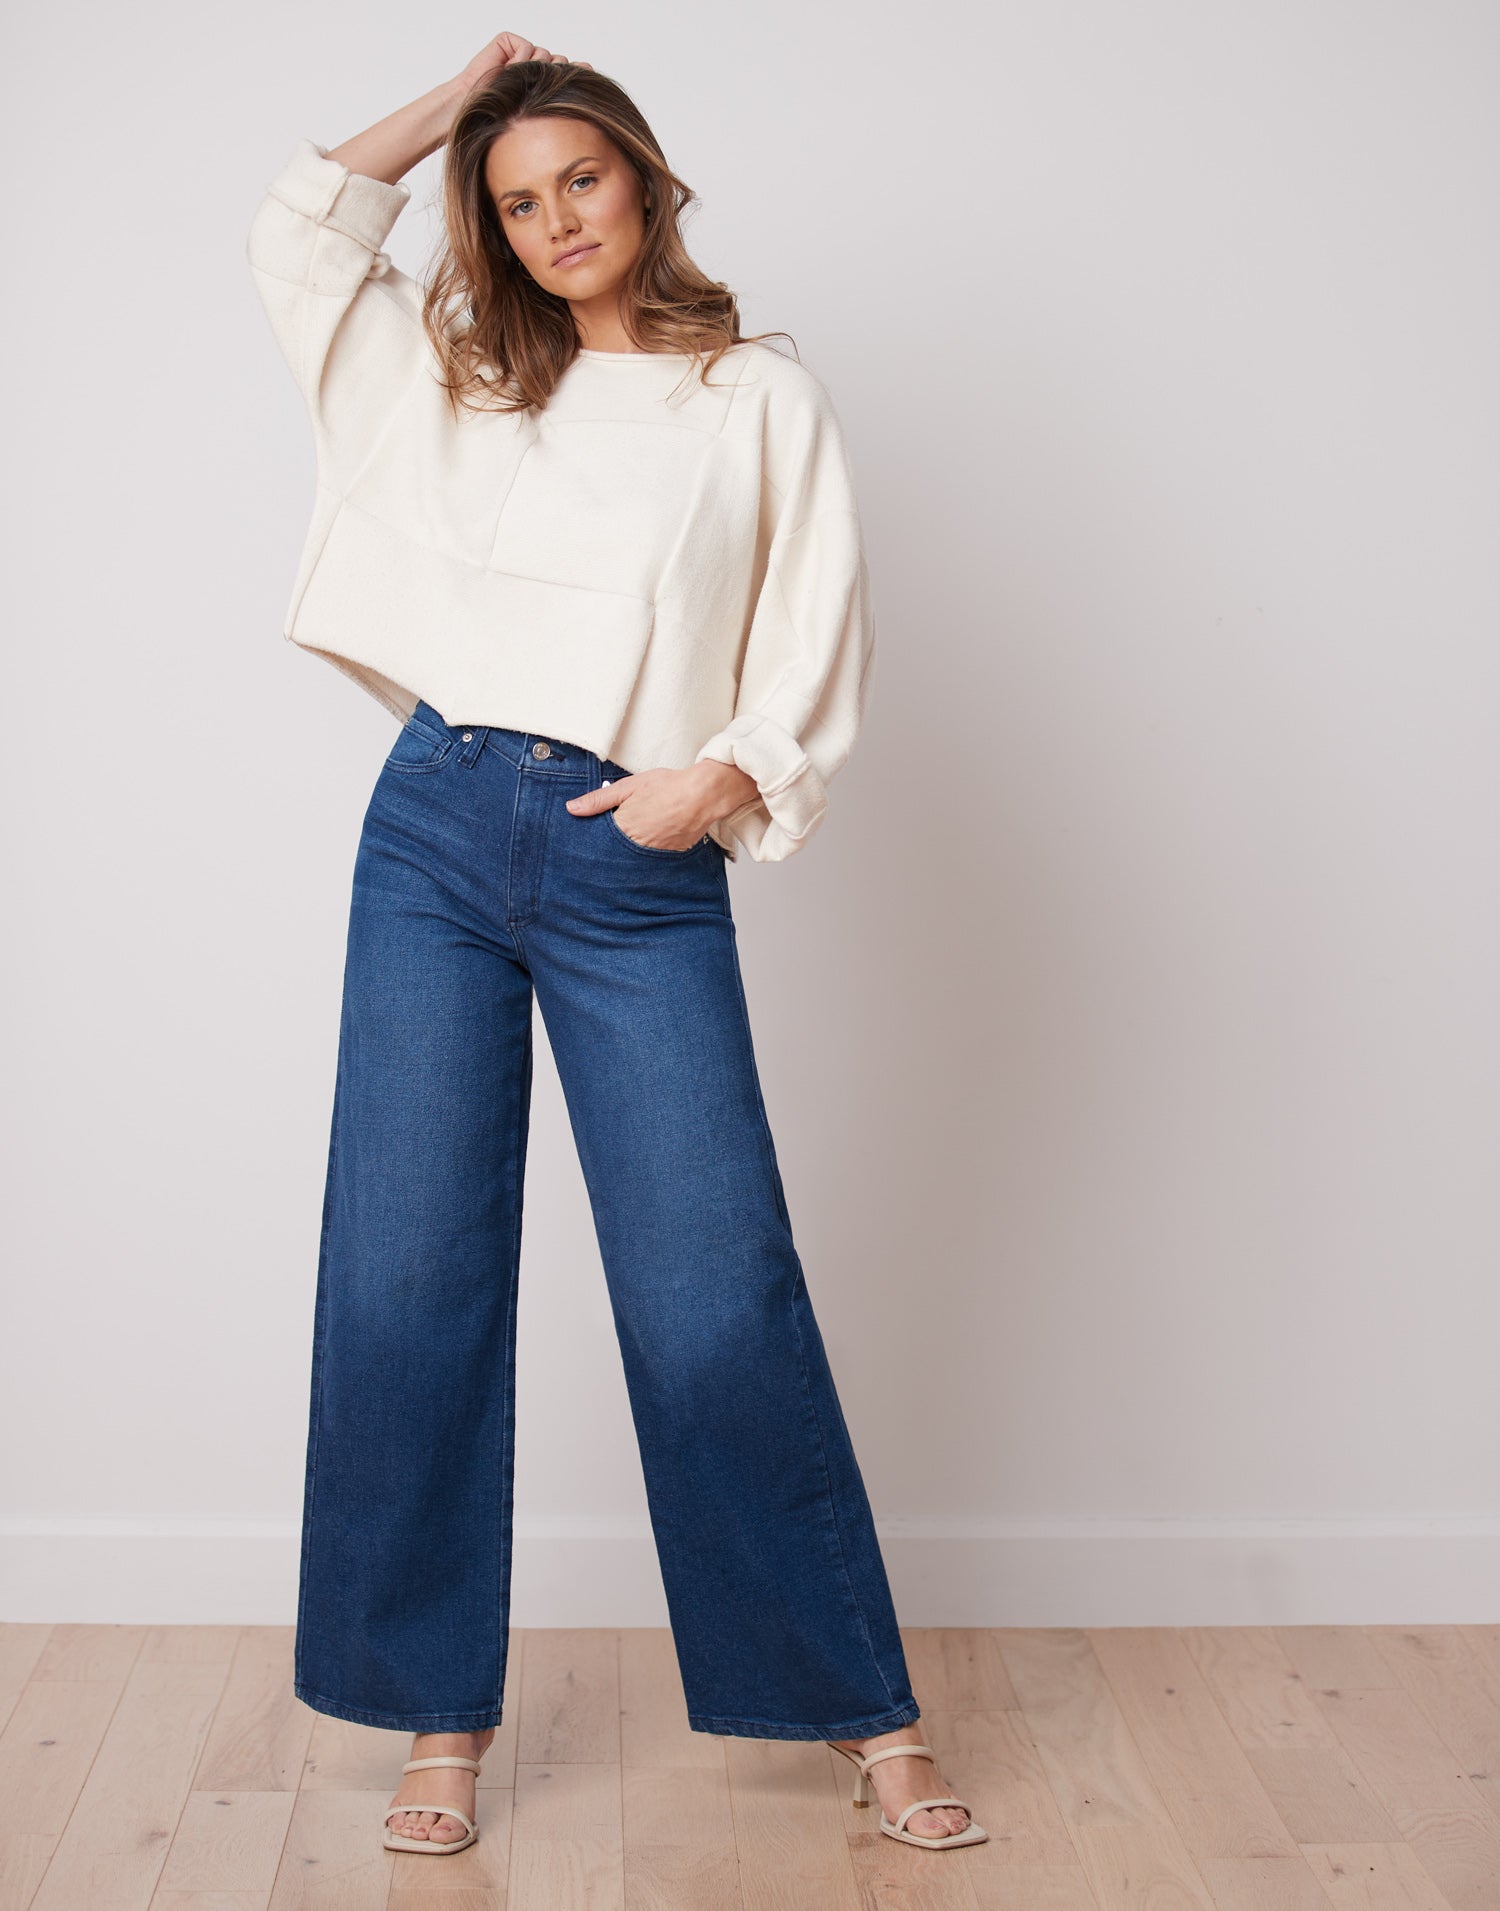 YOGA JEANS - LILY HIGH RISE WIDE LEG